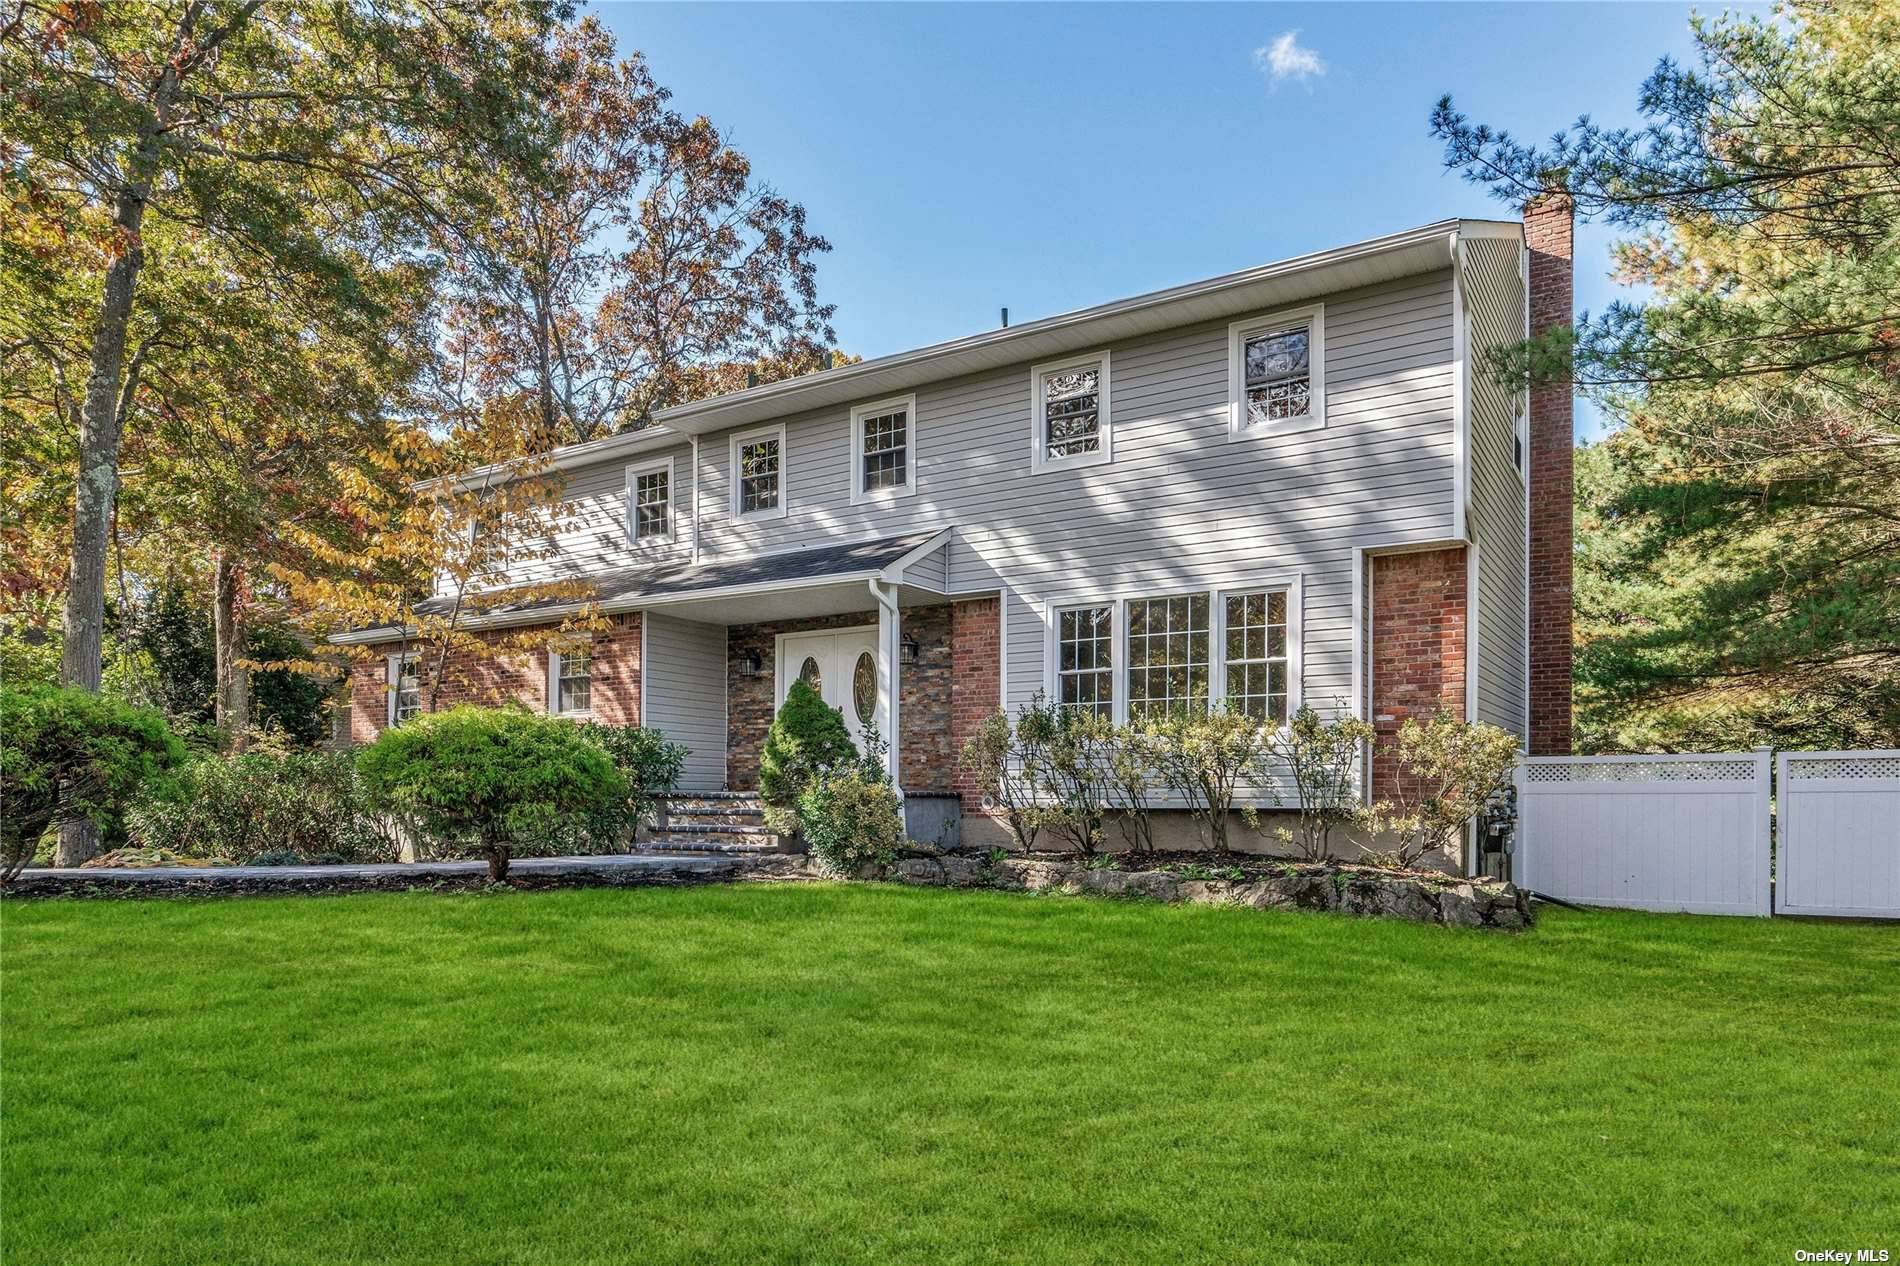 This Wonderful Village on The Hill Colonial Offers 5 Bedrooms, 3 New Full Baths, 1 Half Bath, Large Den With A Wood Burning Stone Fireplace, Extended New Eat In Kitchen, ...